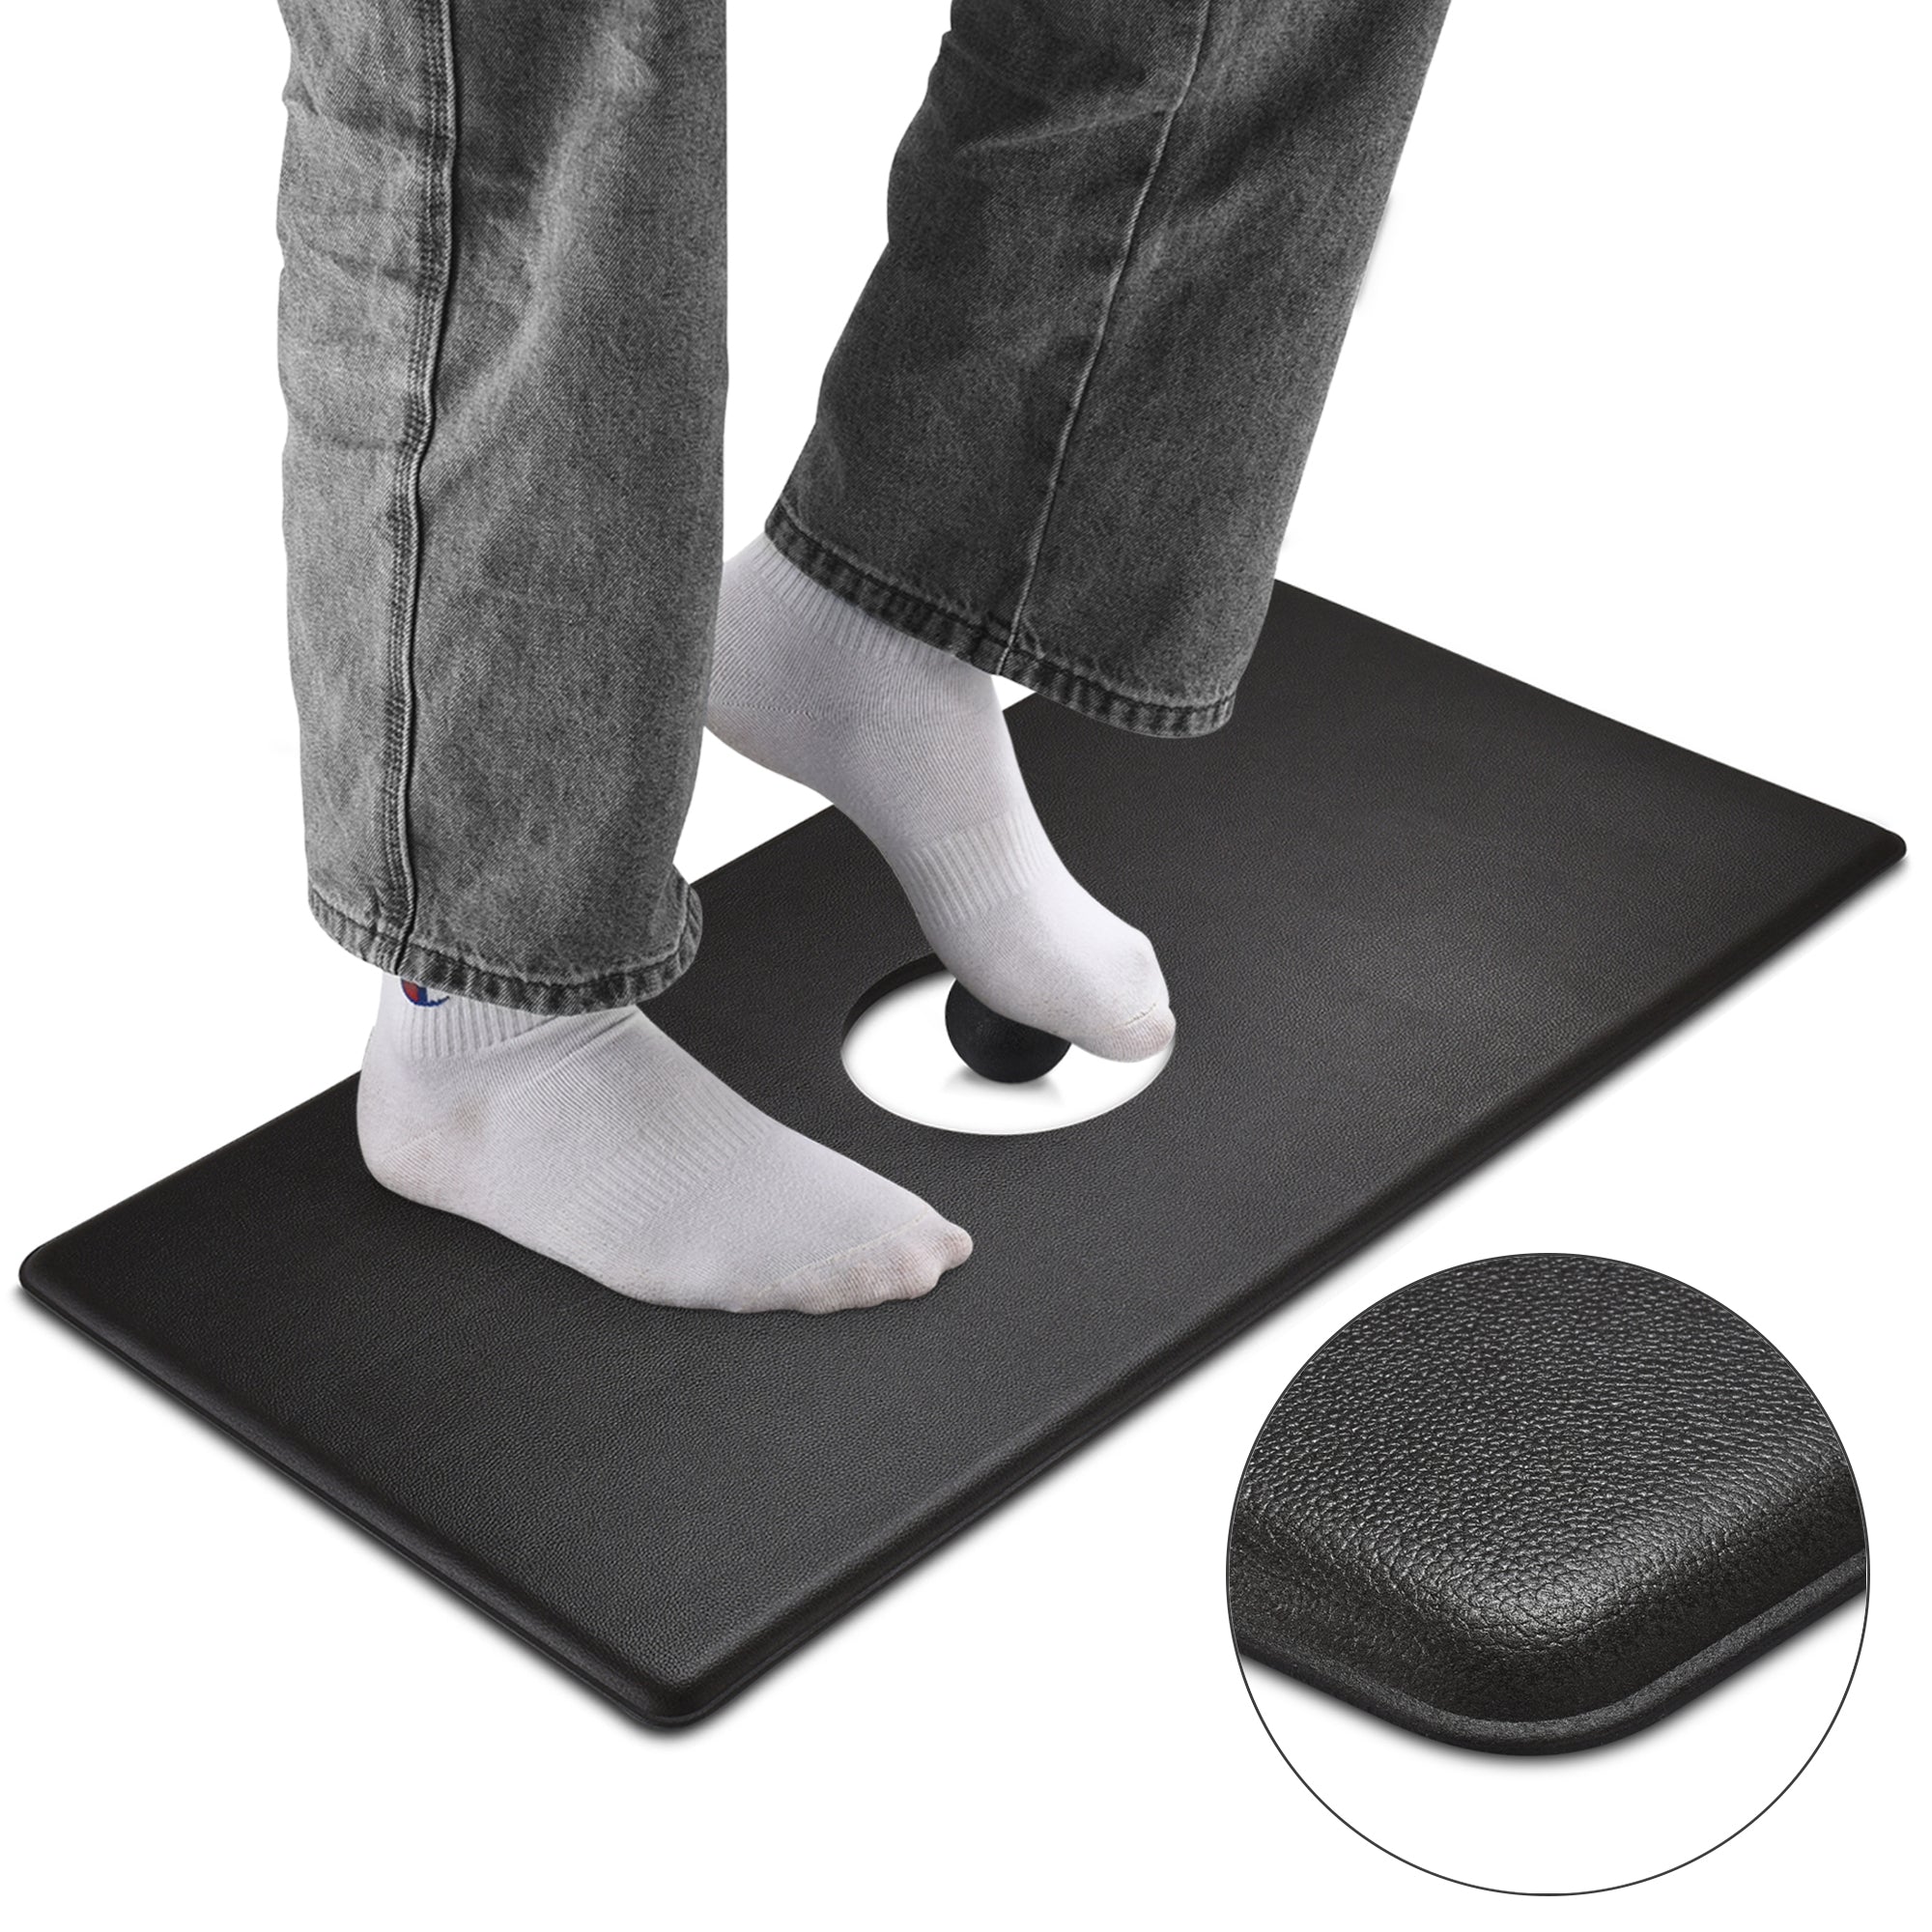 Slip this mat under your desk and get a foot massage while you work